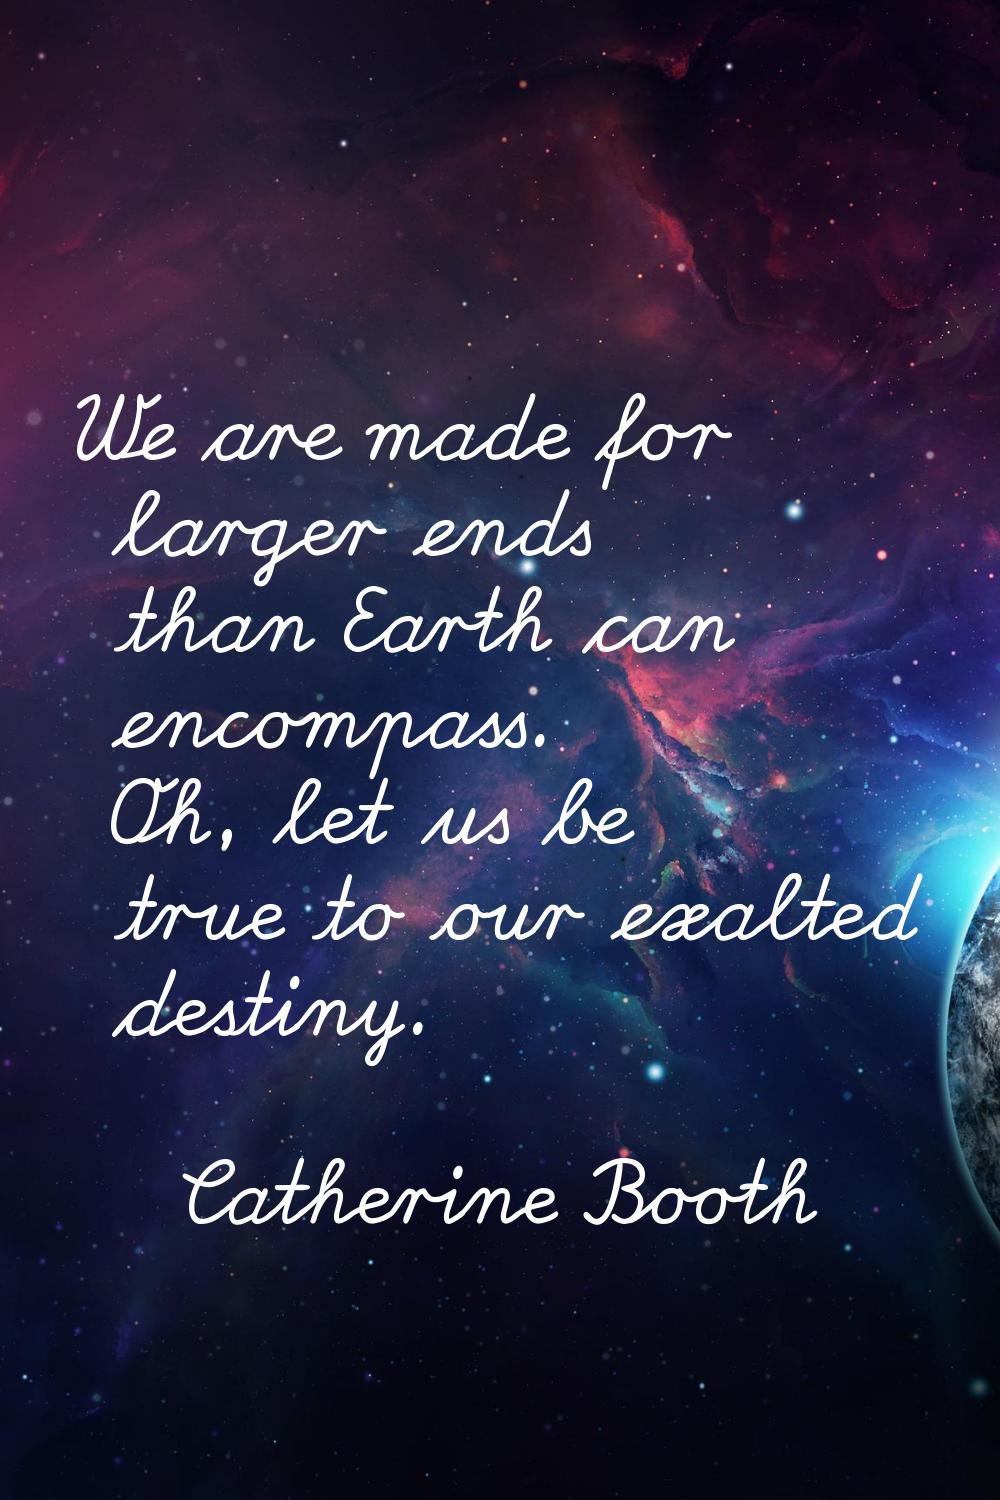 We are made for larger ends than Earth can encompass. Oh, let us be true to our exalted destiny.